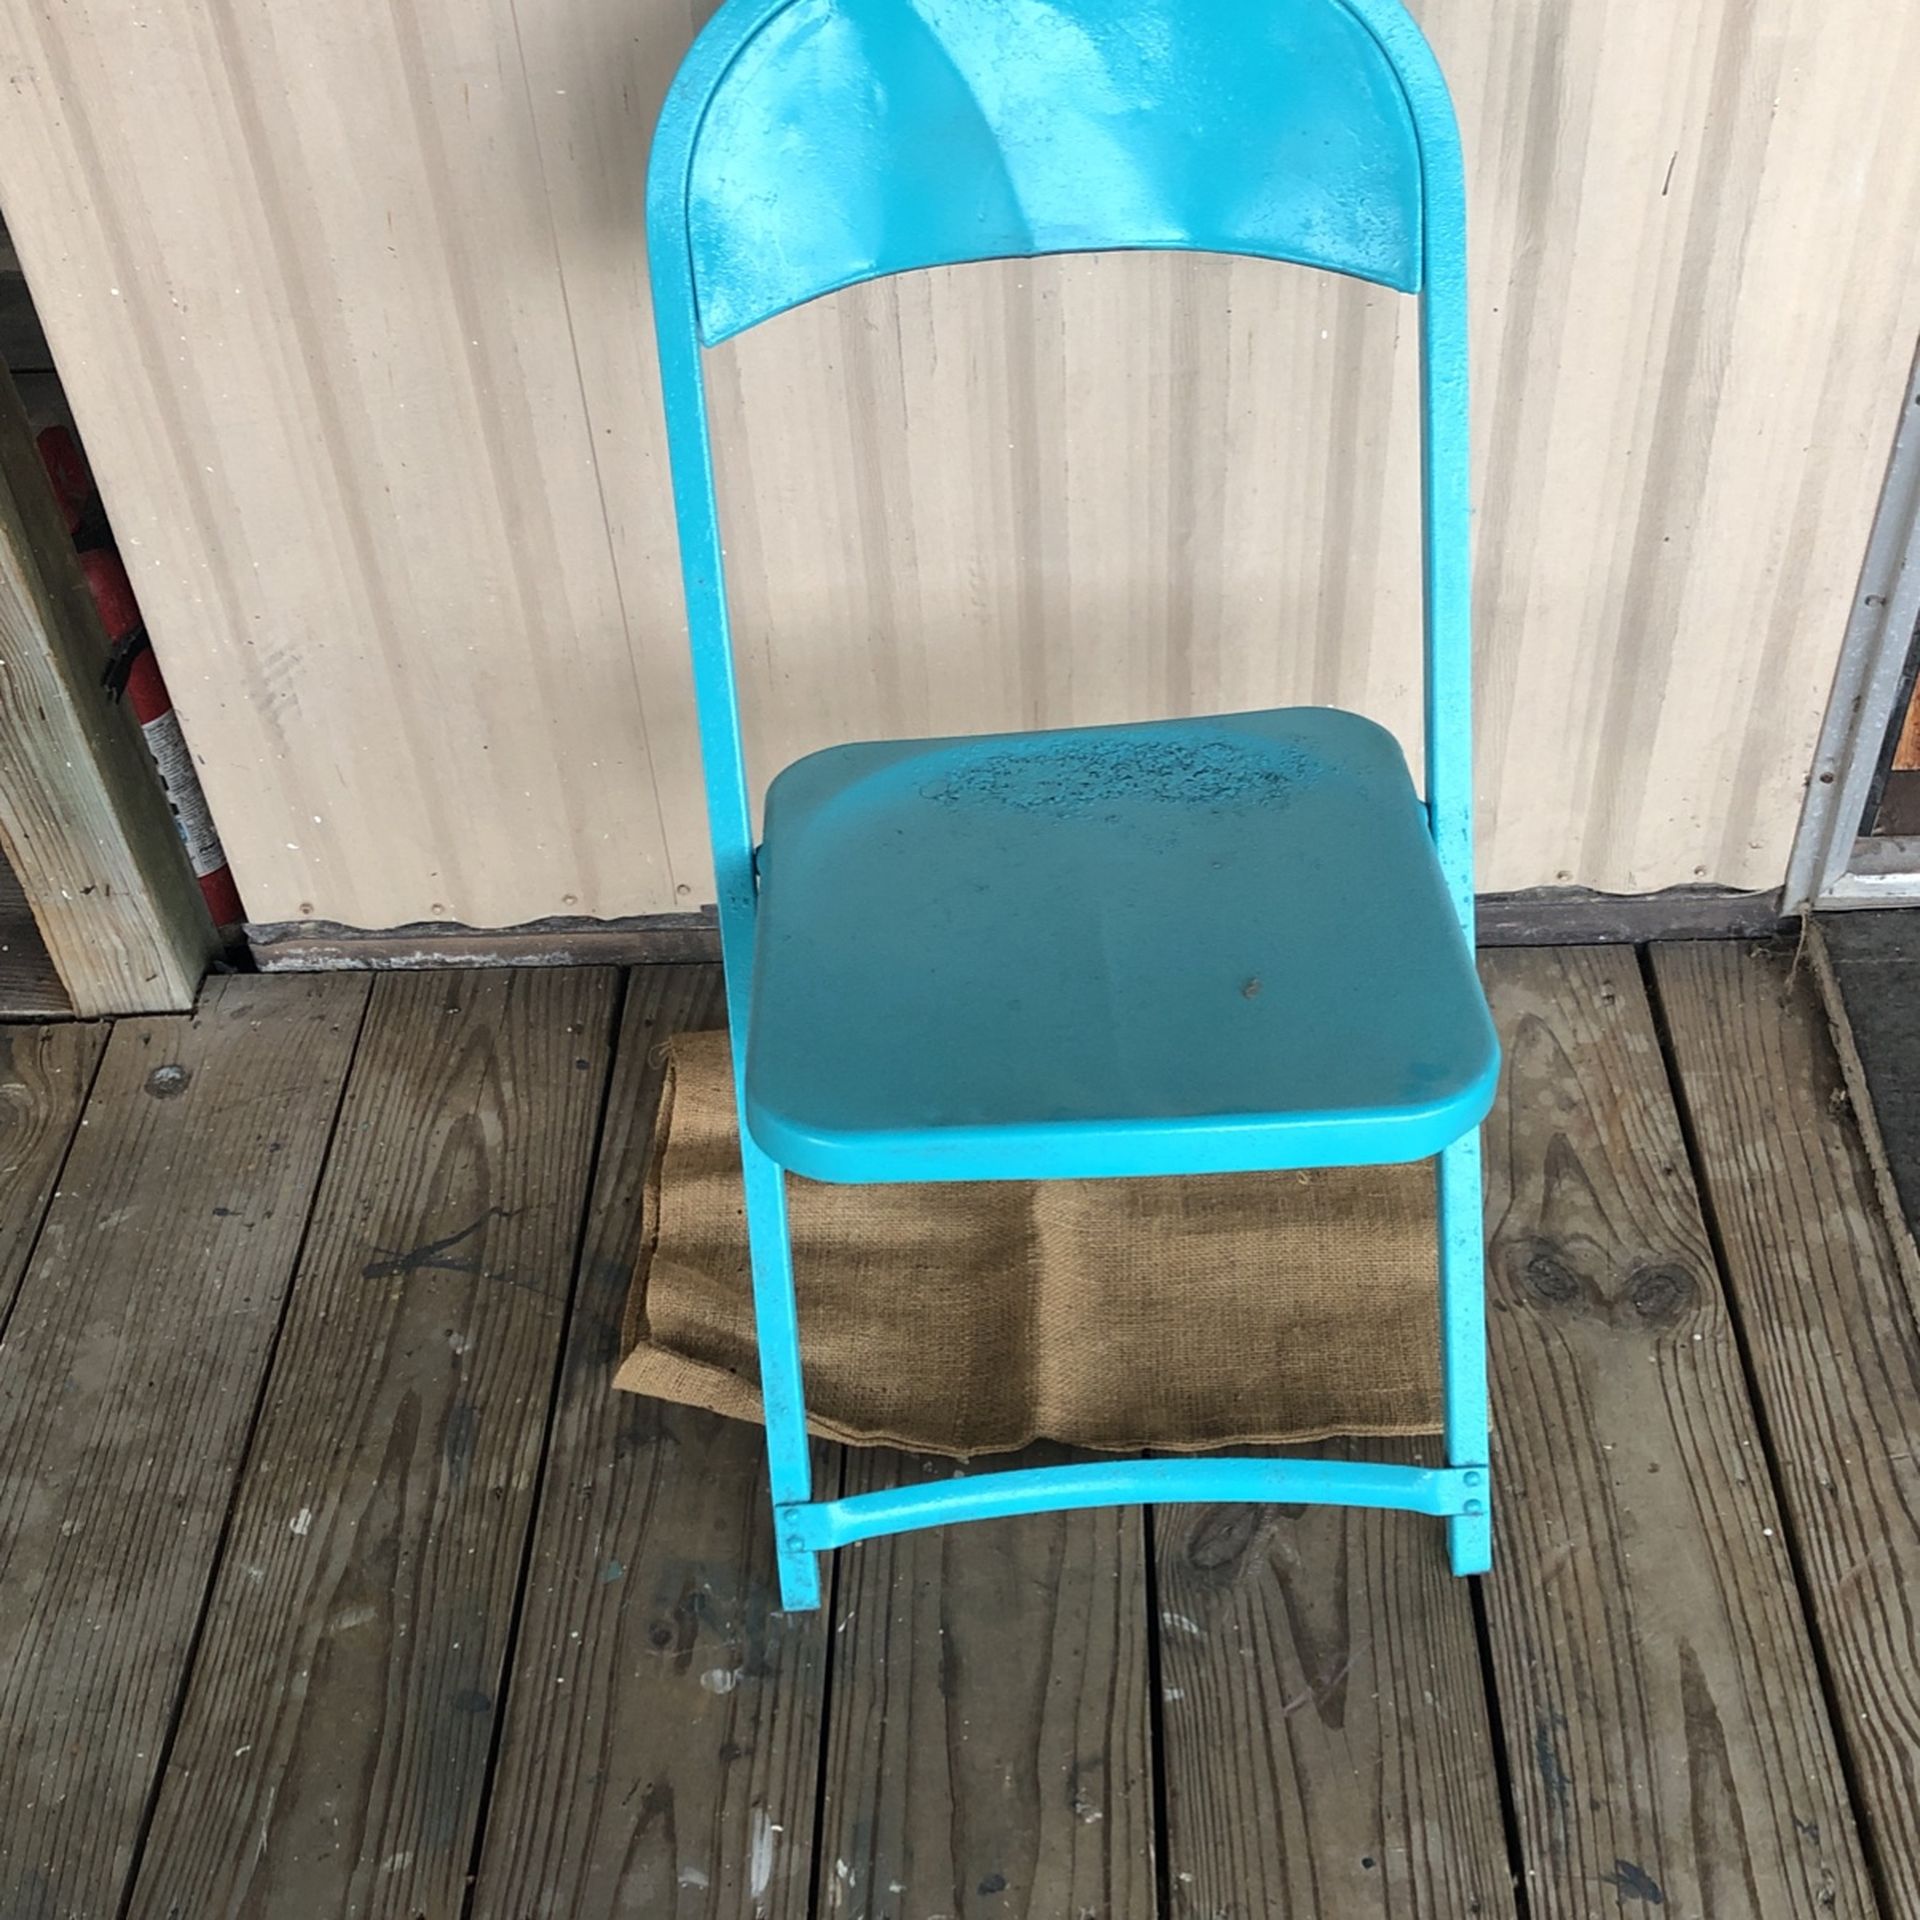 Original Vintage Teal Colored Card Players Folding Chair